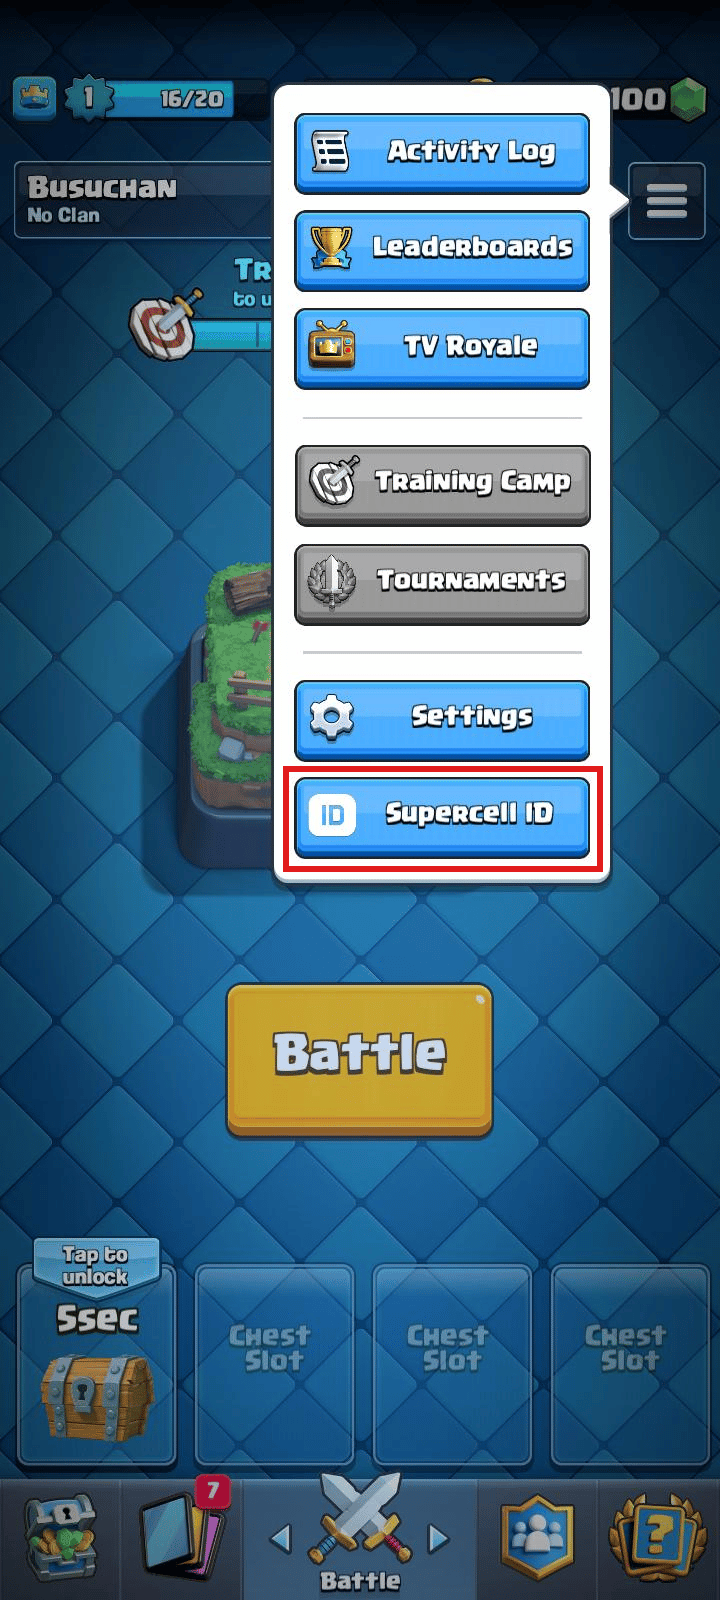 Tap on Supercell ID.